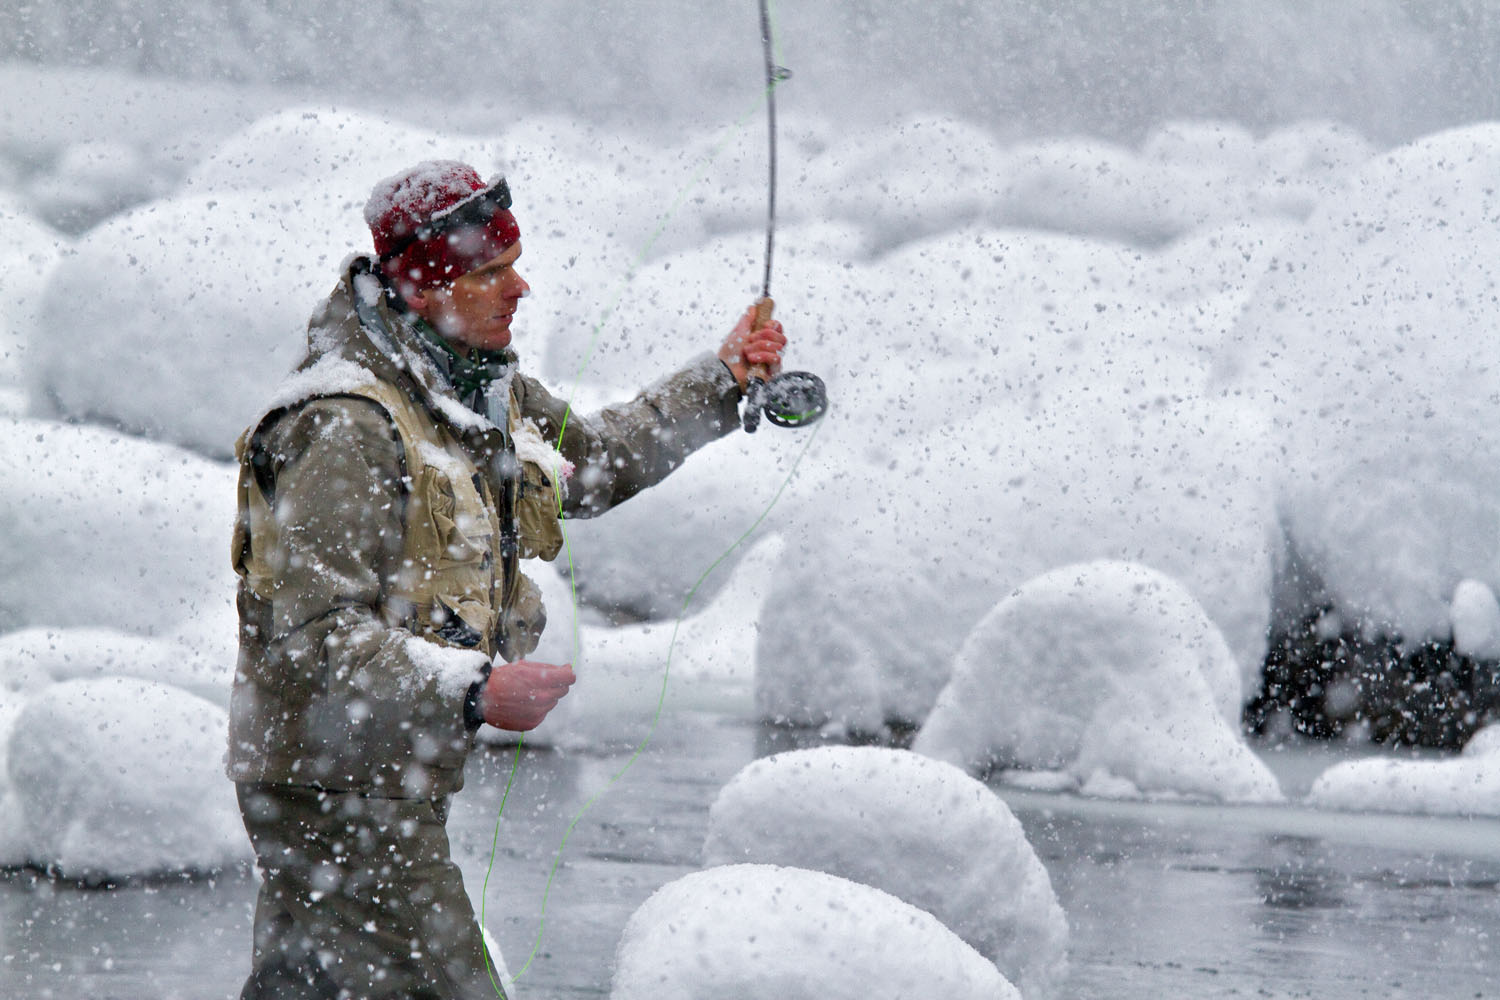  Lifestyle: Chris Solomon fly fishing in the snow, South Fork of the Stillaguamish River, Mt. Baker-Snoqualmie National Forest, Washington 